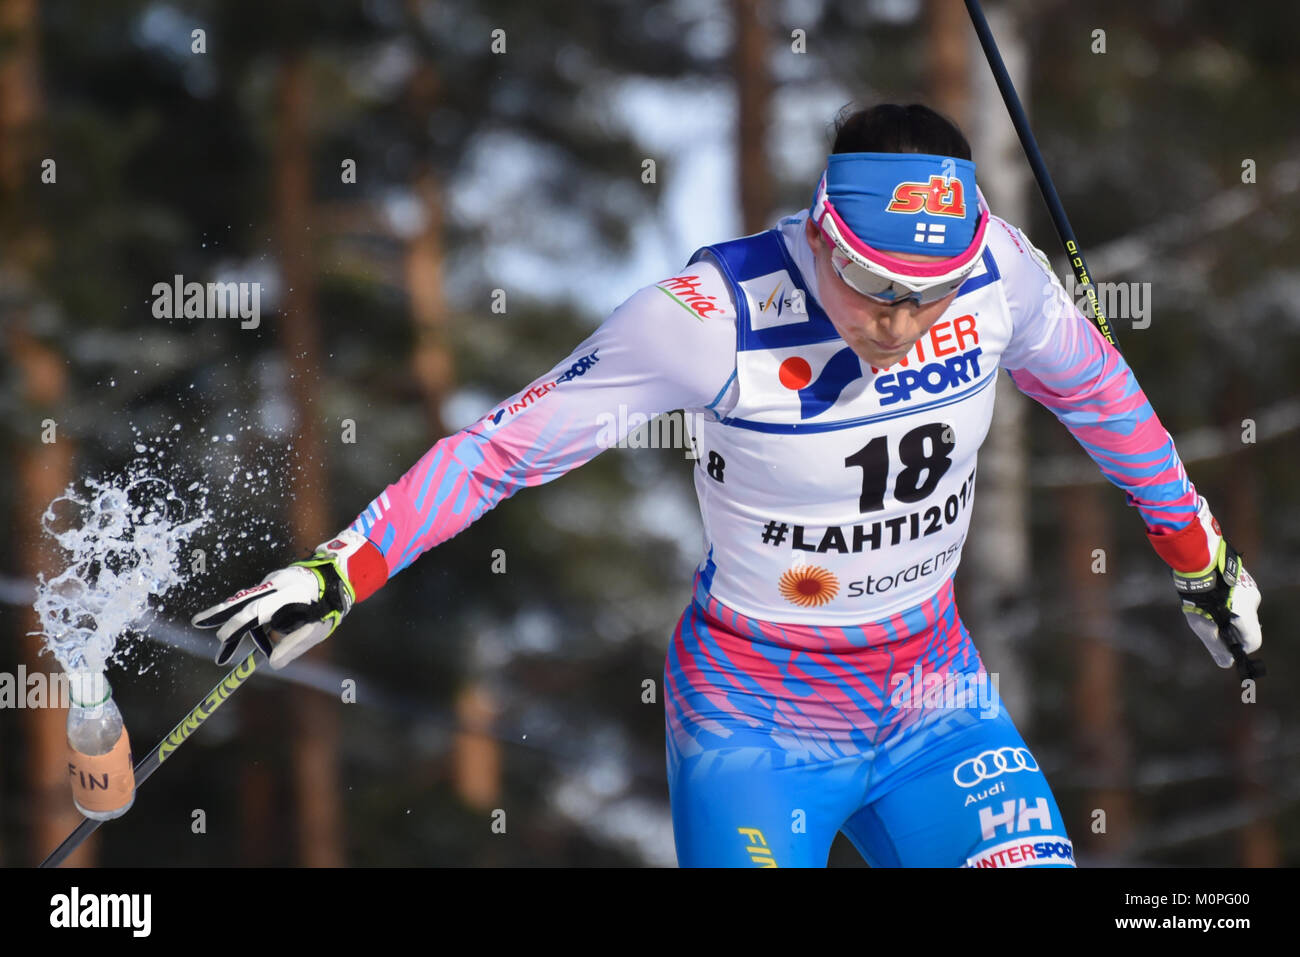 Finland's Aino-Kaisa SAARINEN discards a drink during the 2017 30-kilometer competition at the World Nordic Ski Championships in Lahti, Finland. Stock Photo